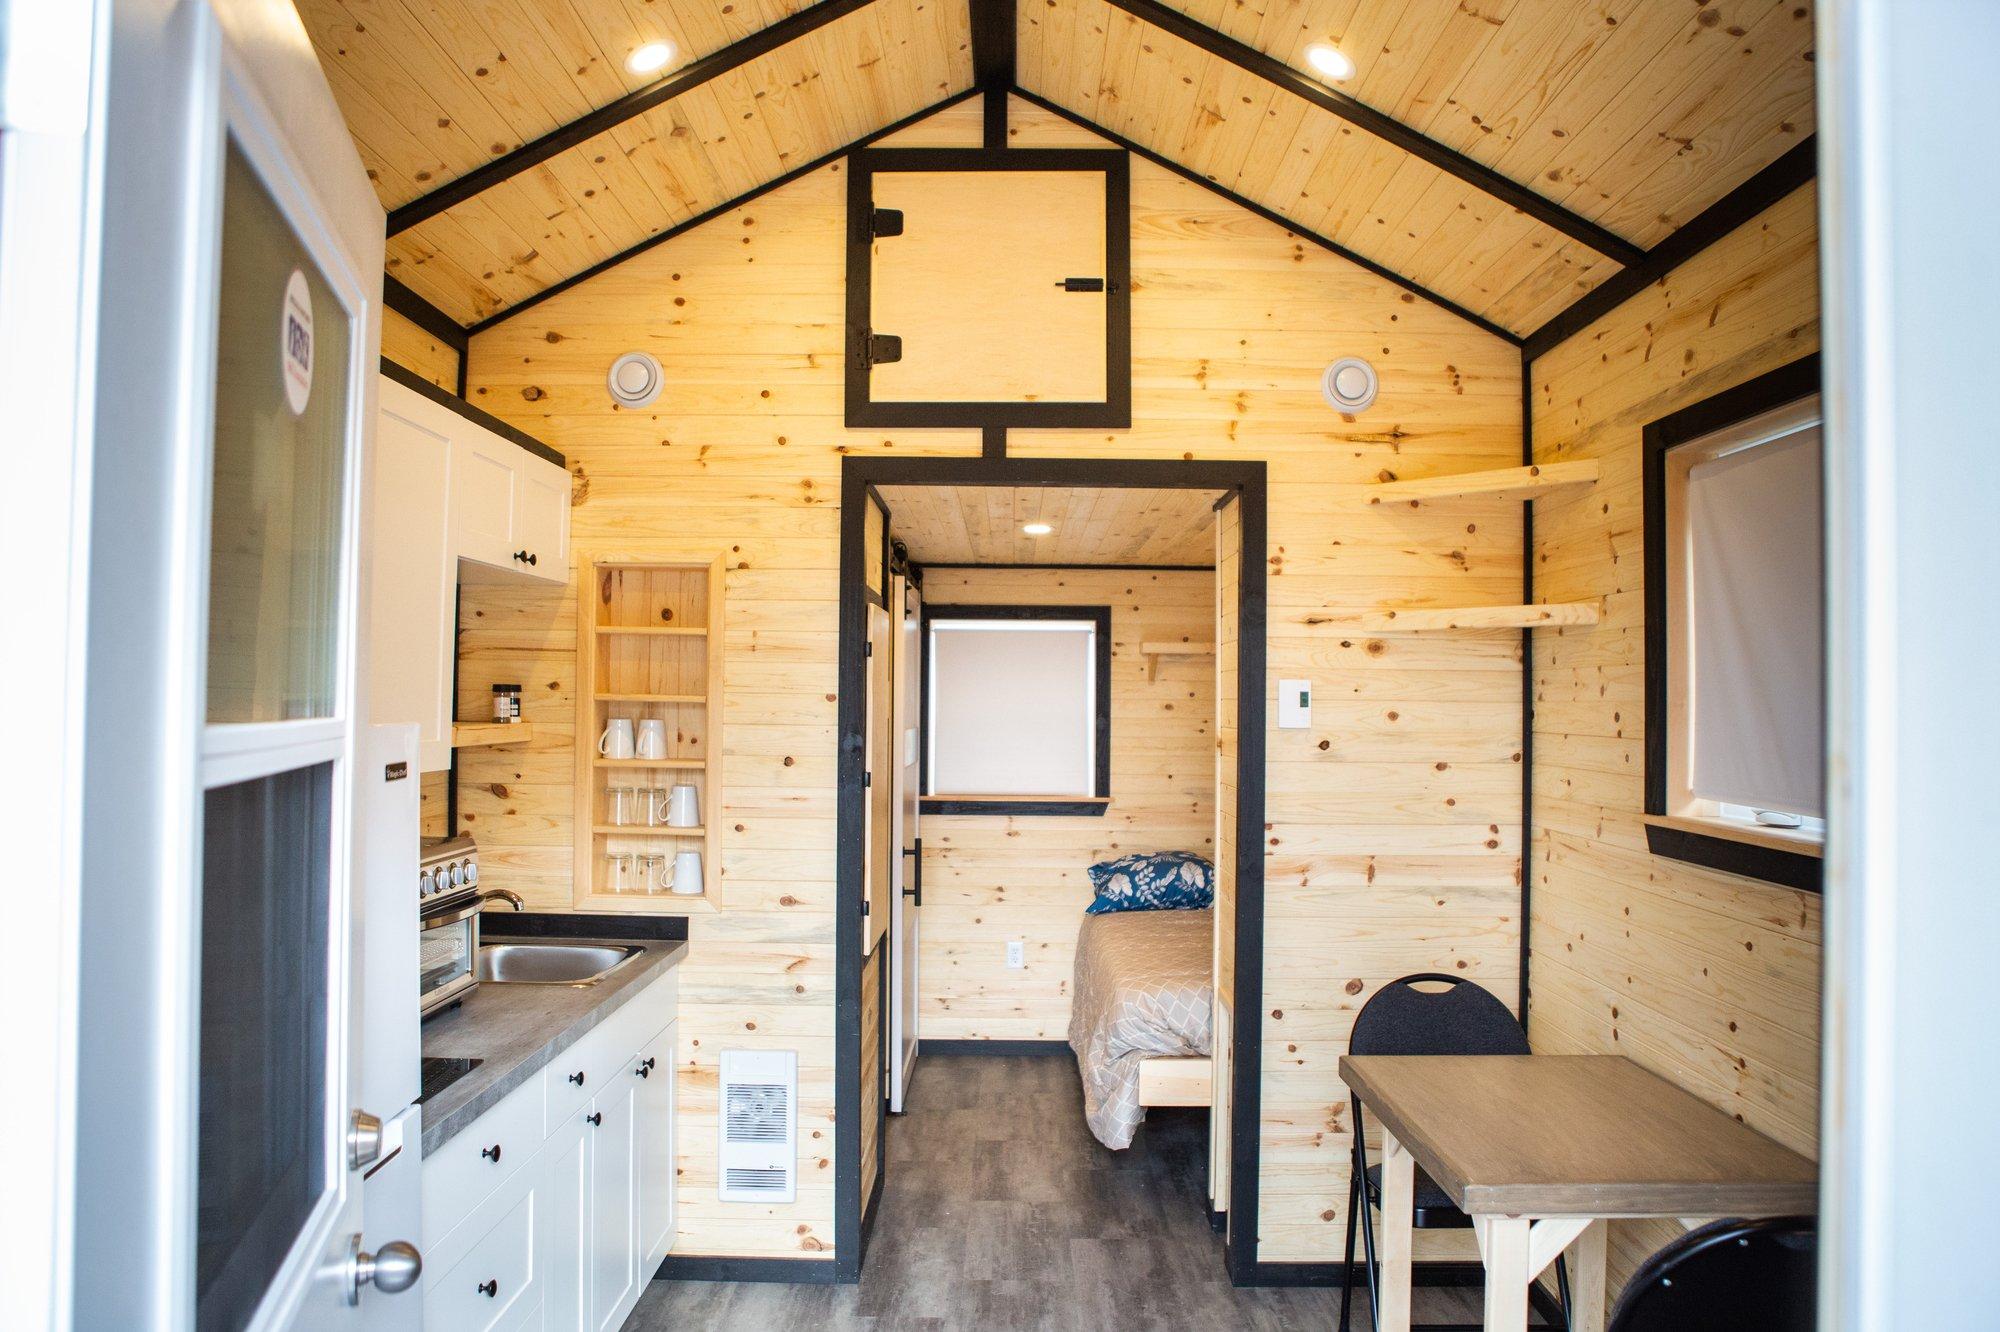 A photo of the interior of a tiny home, complete with a small kitchen and a bed in the background.